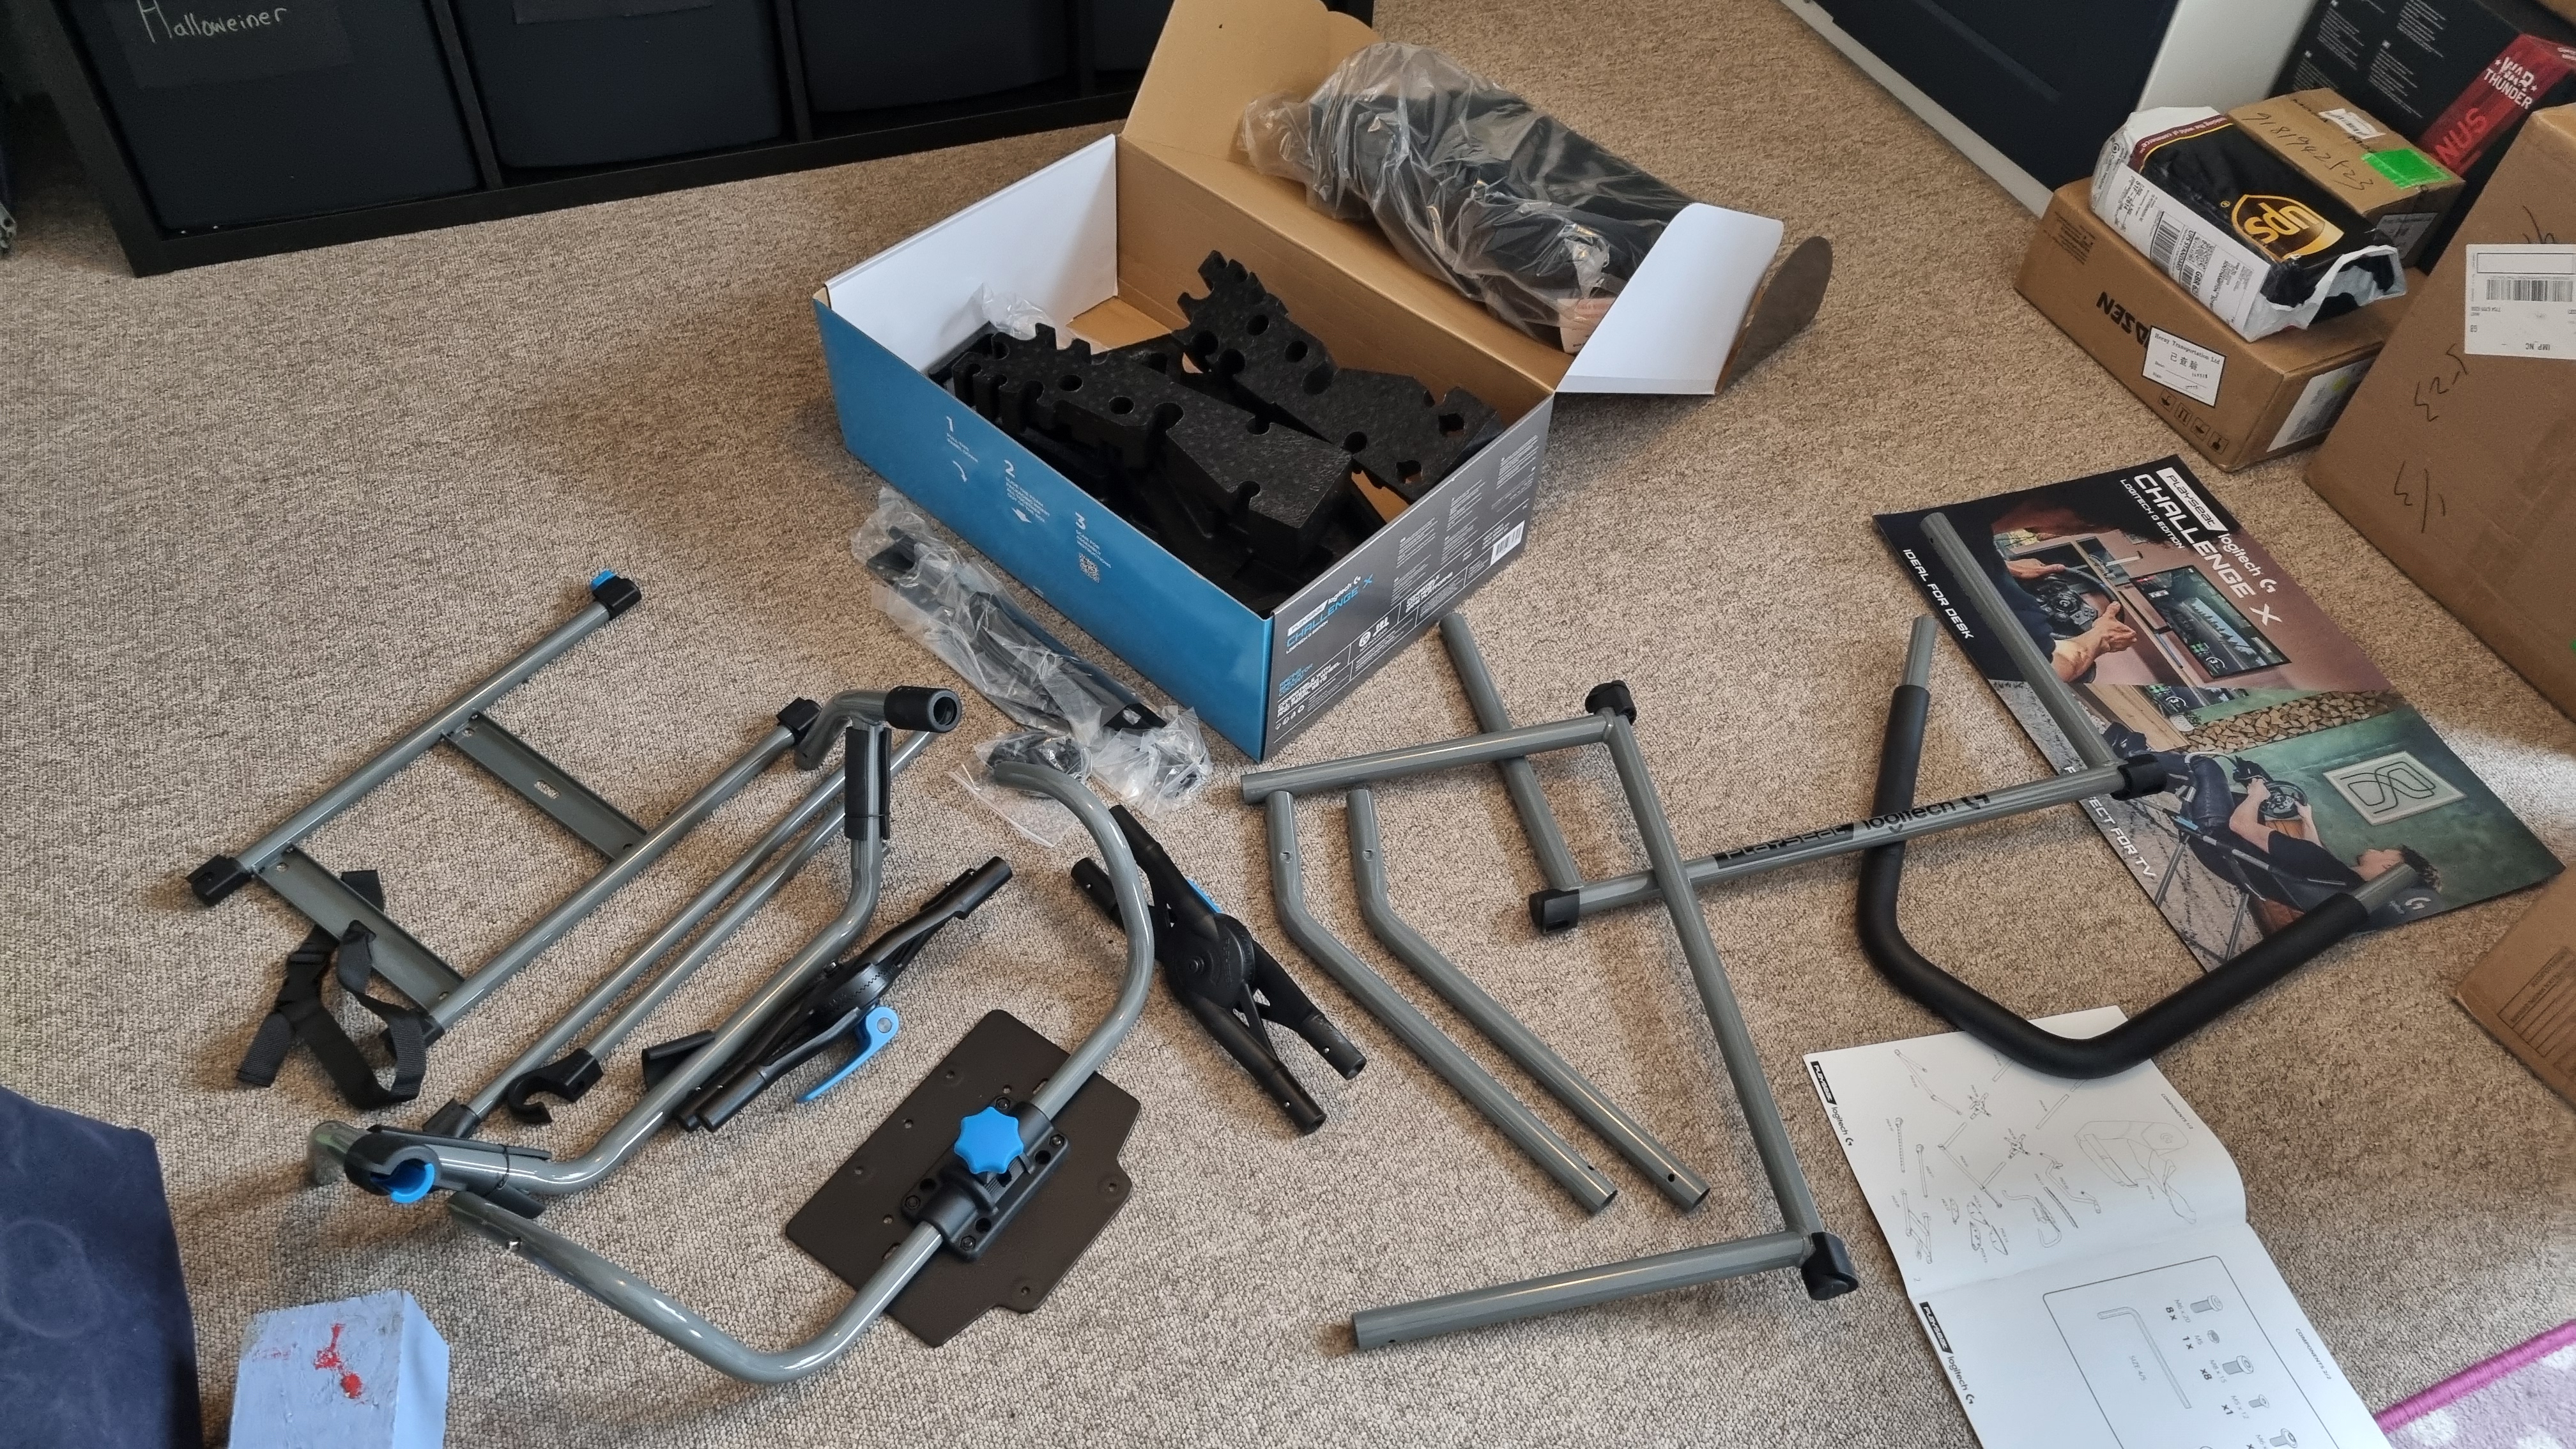 The parts for the Logitech Playseat Challenge X, spread out on the floor and disassembled